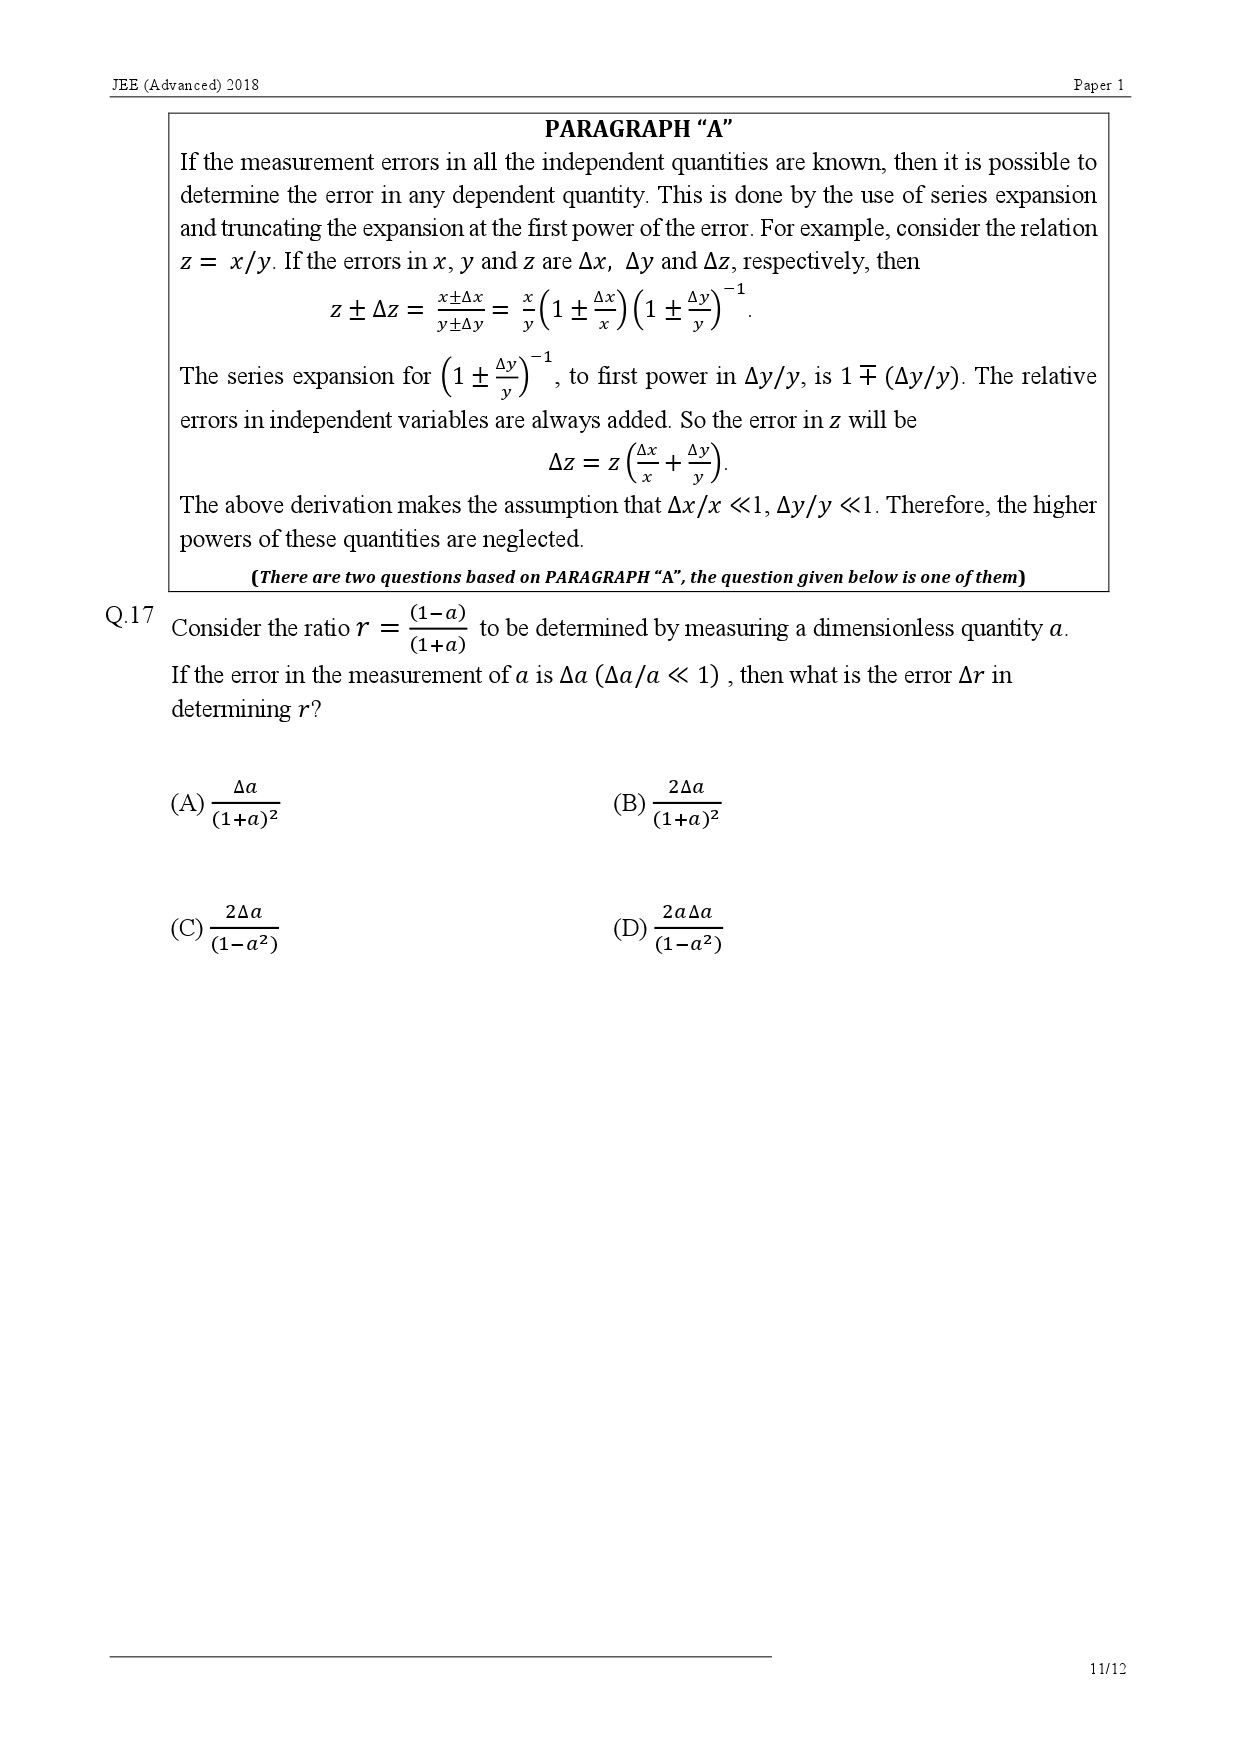 JEE Advanced Exam Question Paper 2018 Paper 1 Physics 11